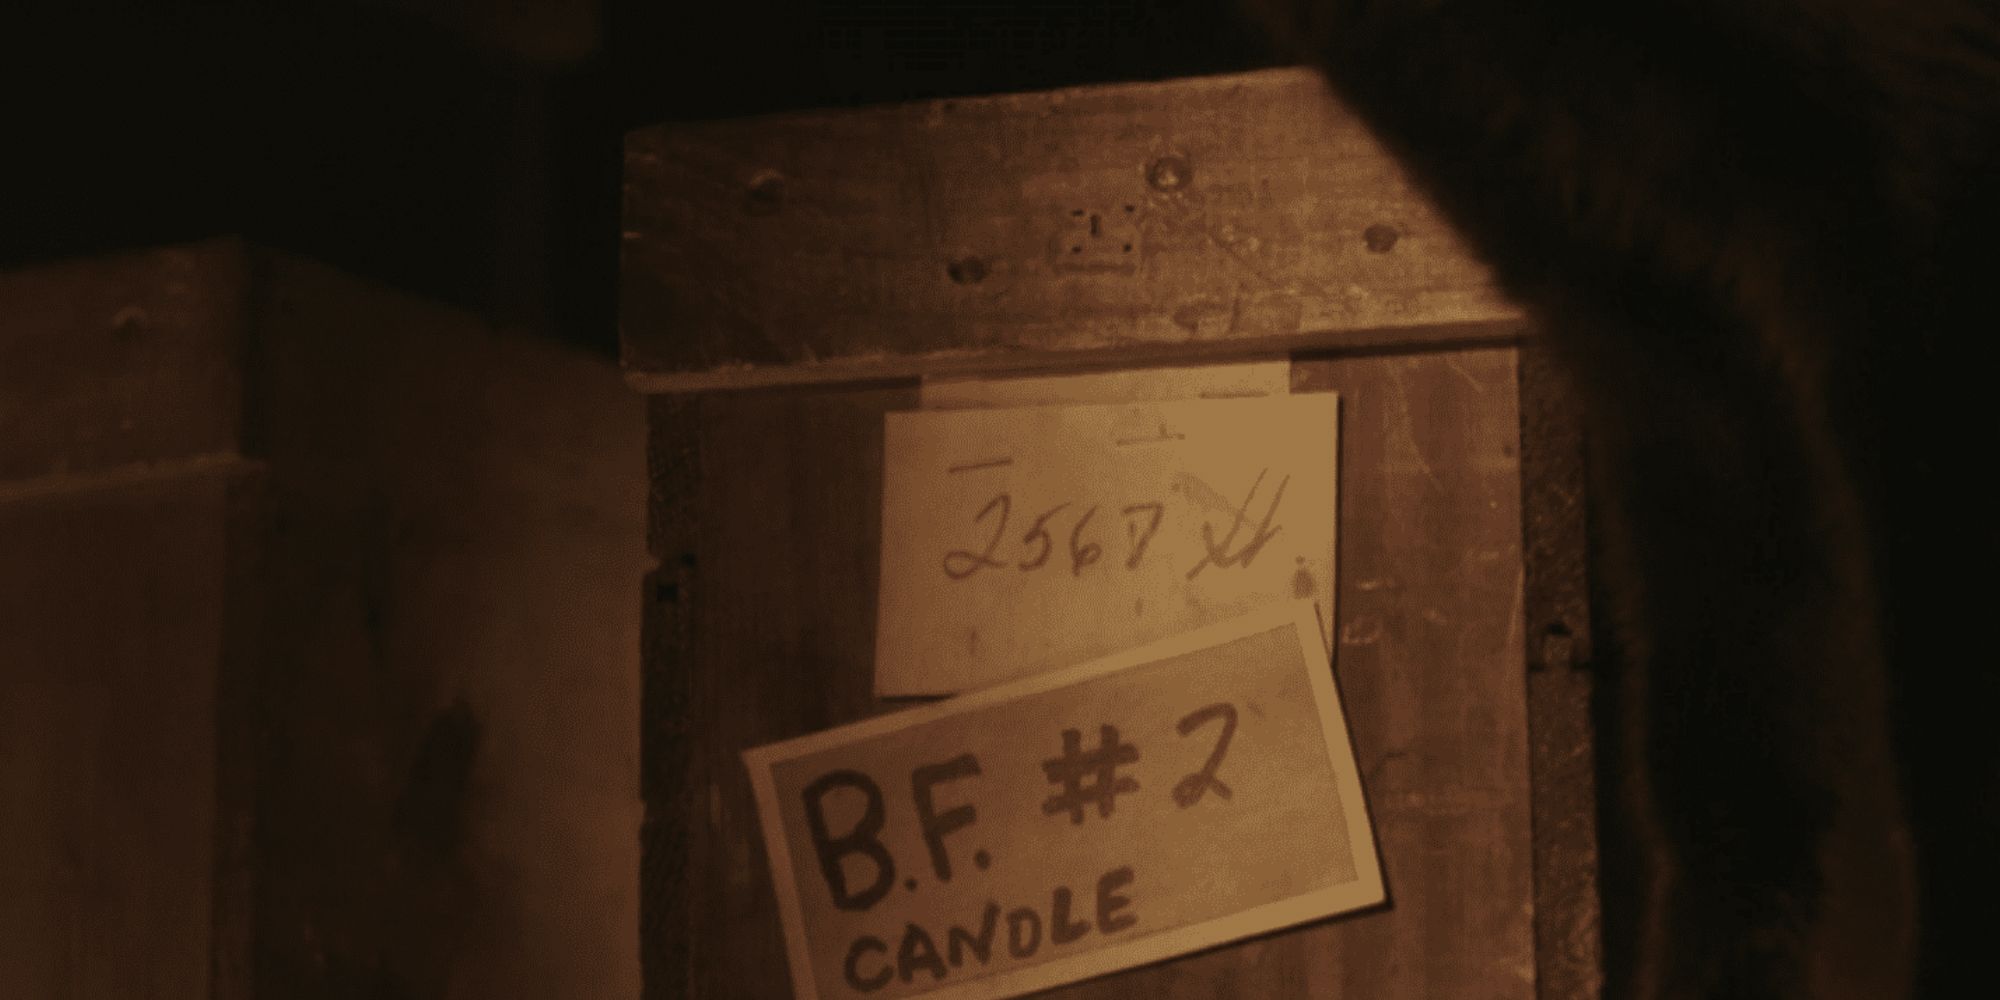 A storage box holding a black flame candle in Hocus Pocus 2